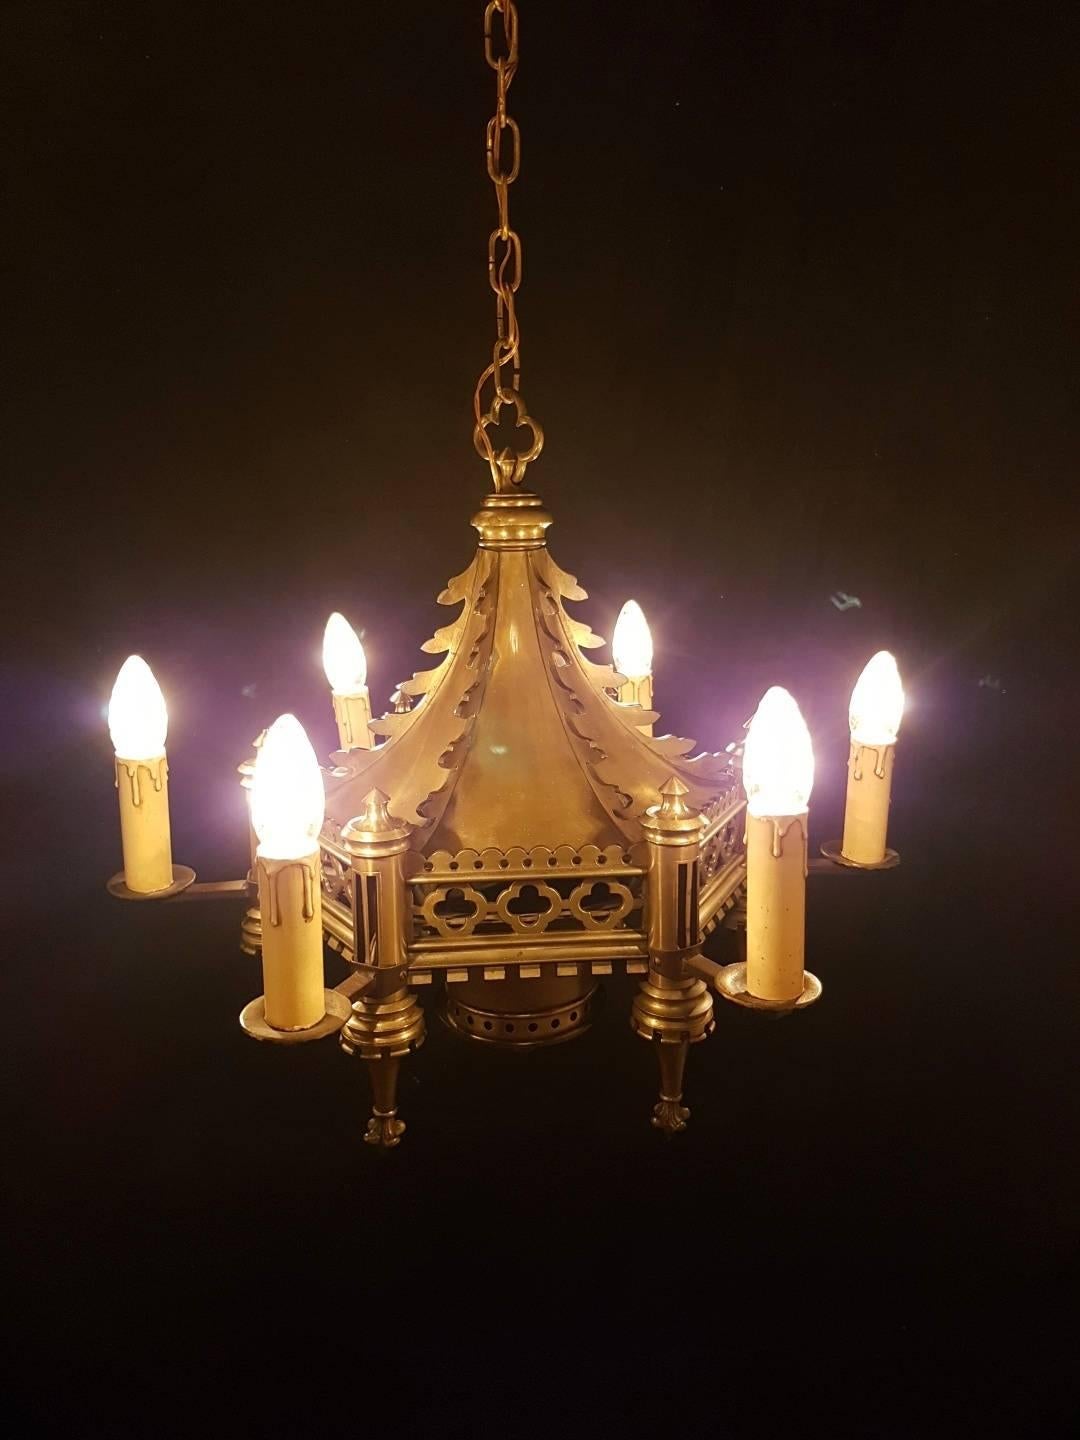 This six light gothic chandelier is made of bronze in 1890. There is an inscription in Latin which shows also the date of manufacturing.

This is just one of our large collection chandeliers. Besides the old and antique chandeliers we have